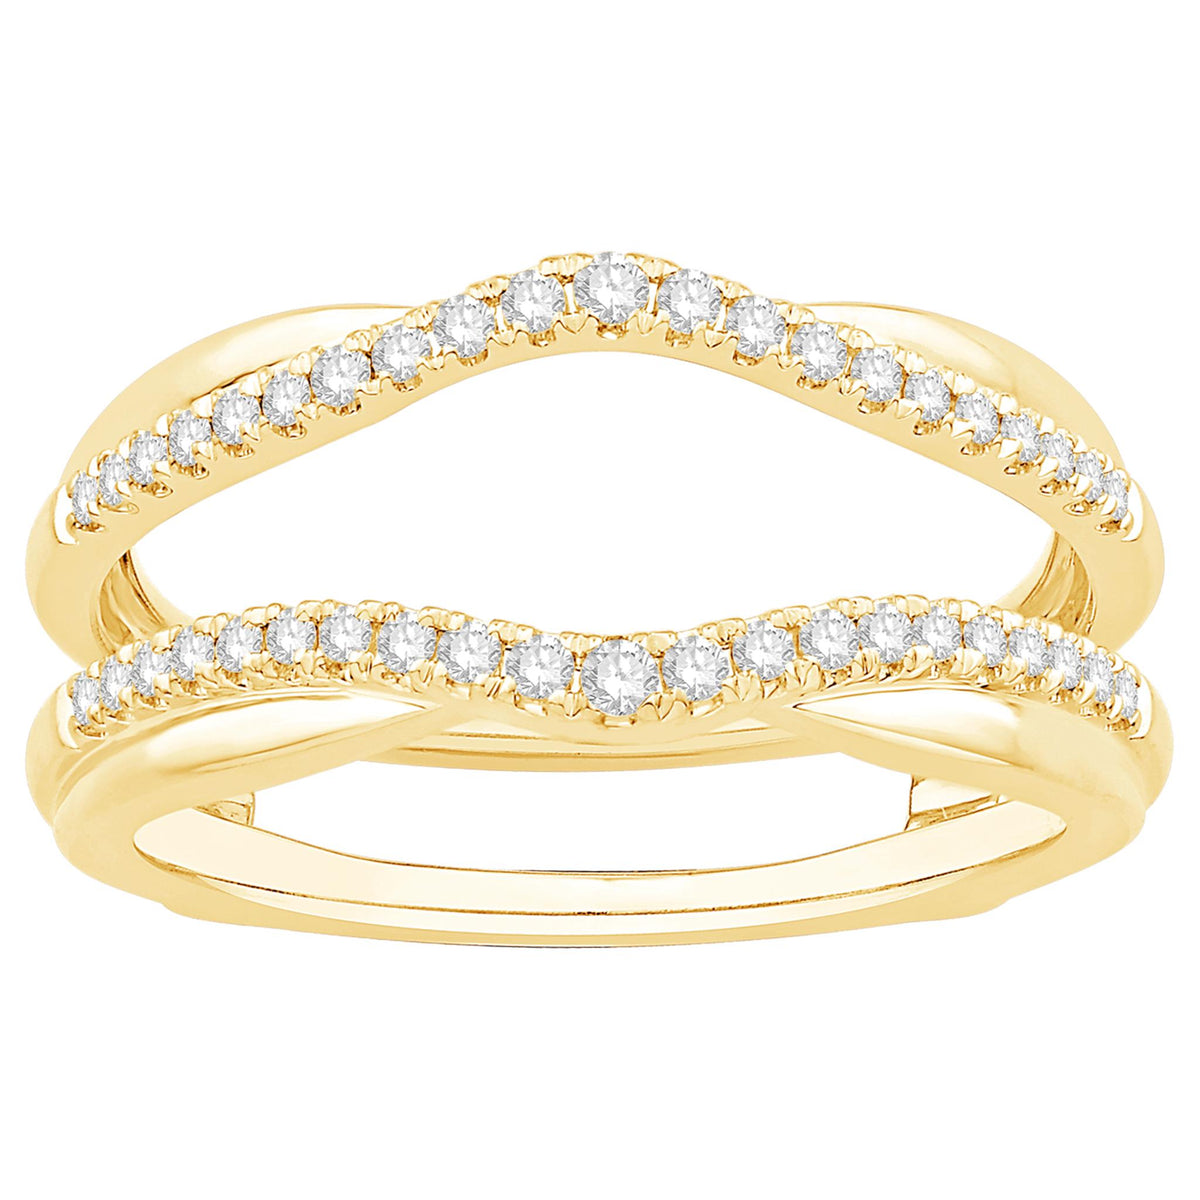 14Kt Yellow Gold Insert Guard / Wrap Insert Guard Ring With 0.50cttw Natural Diamonds